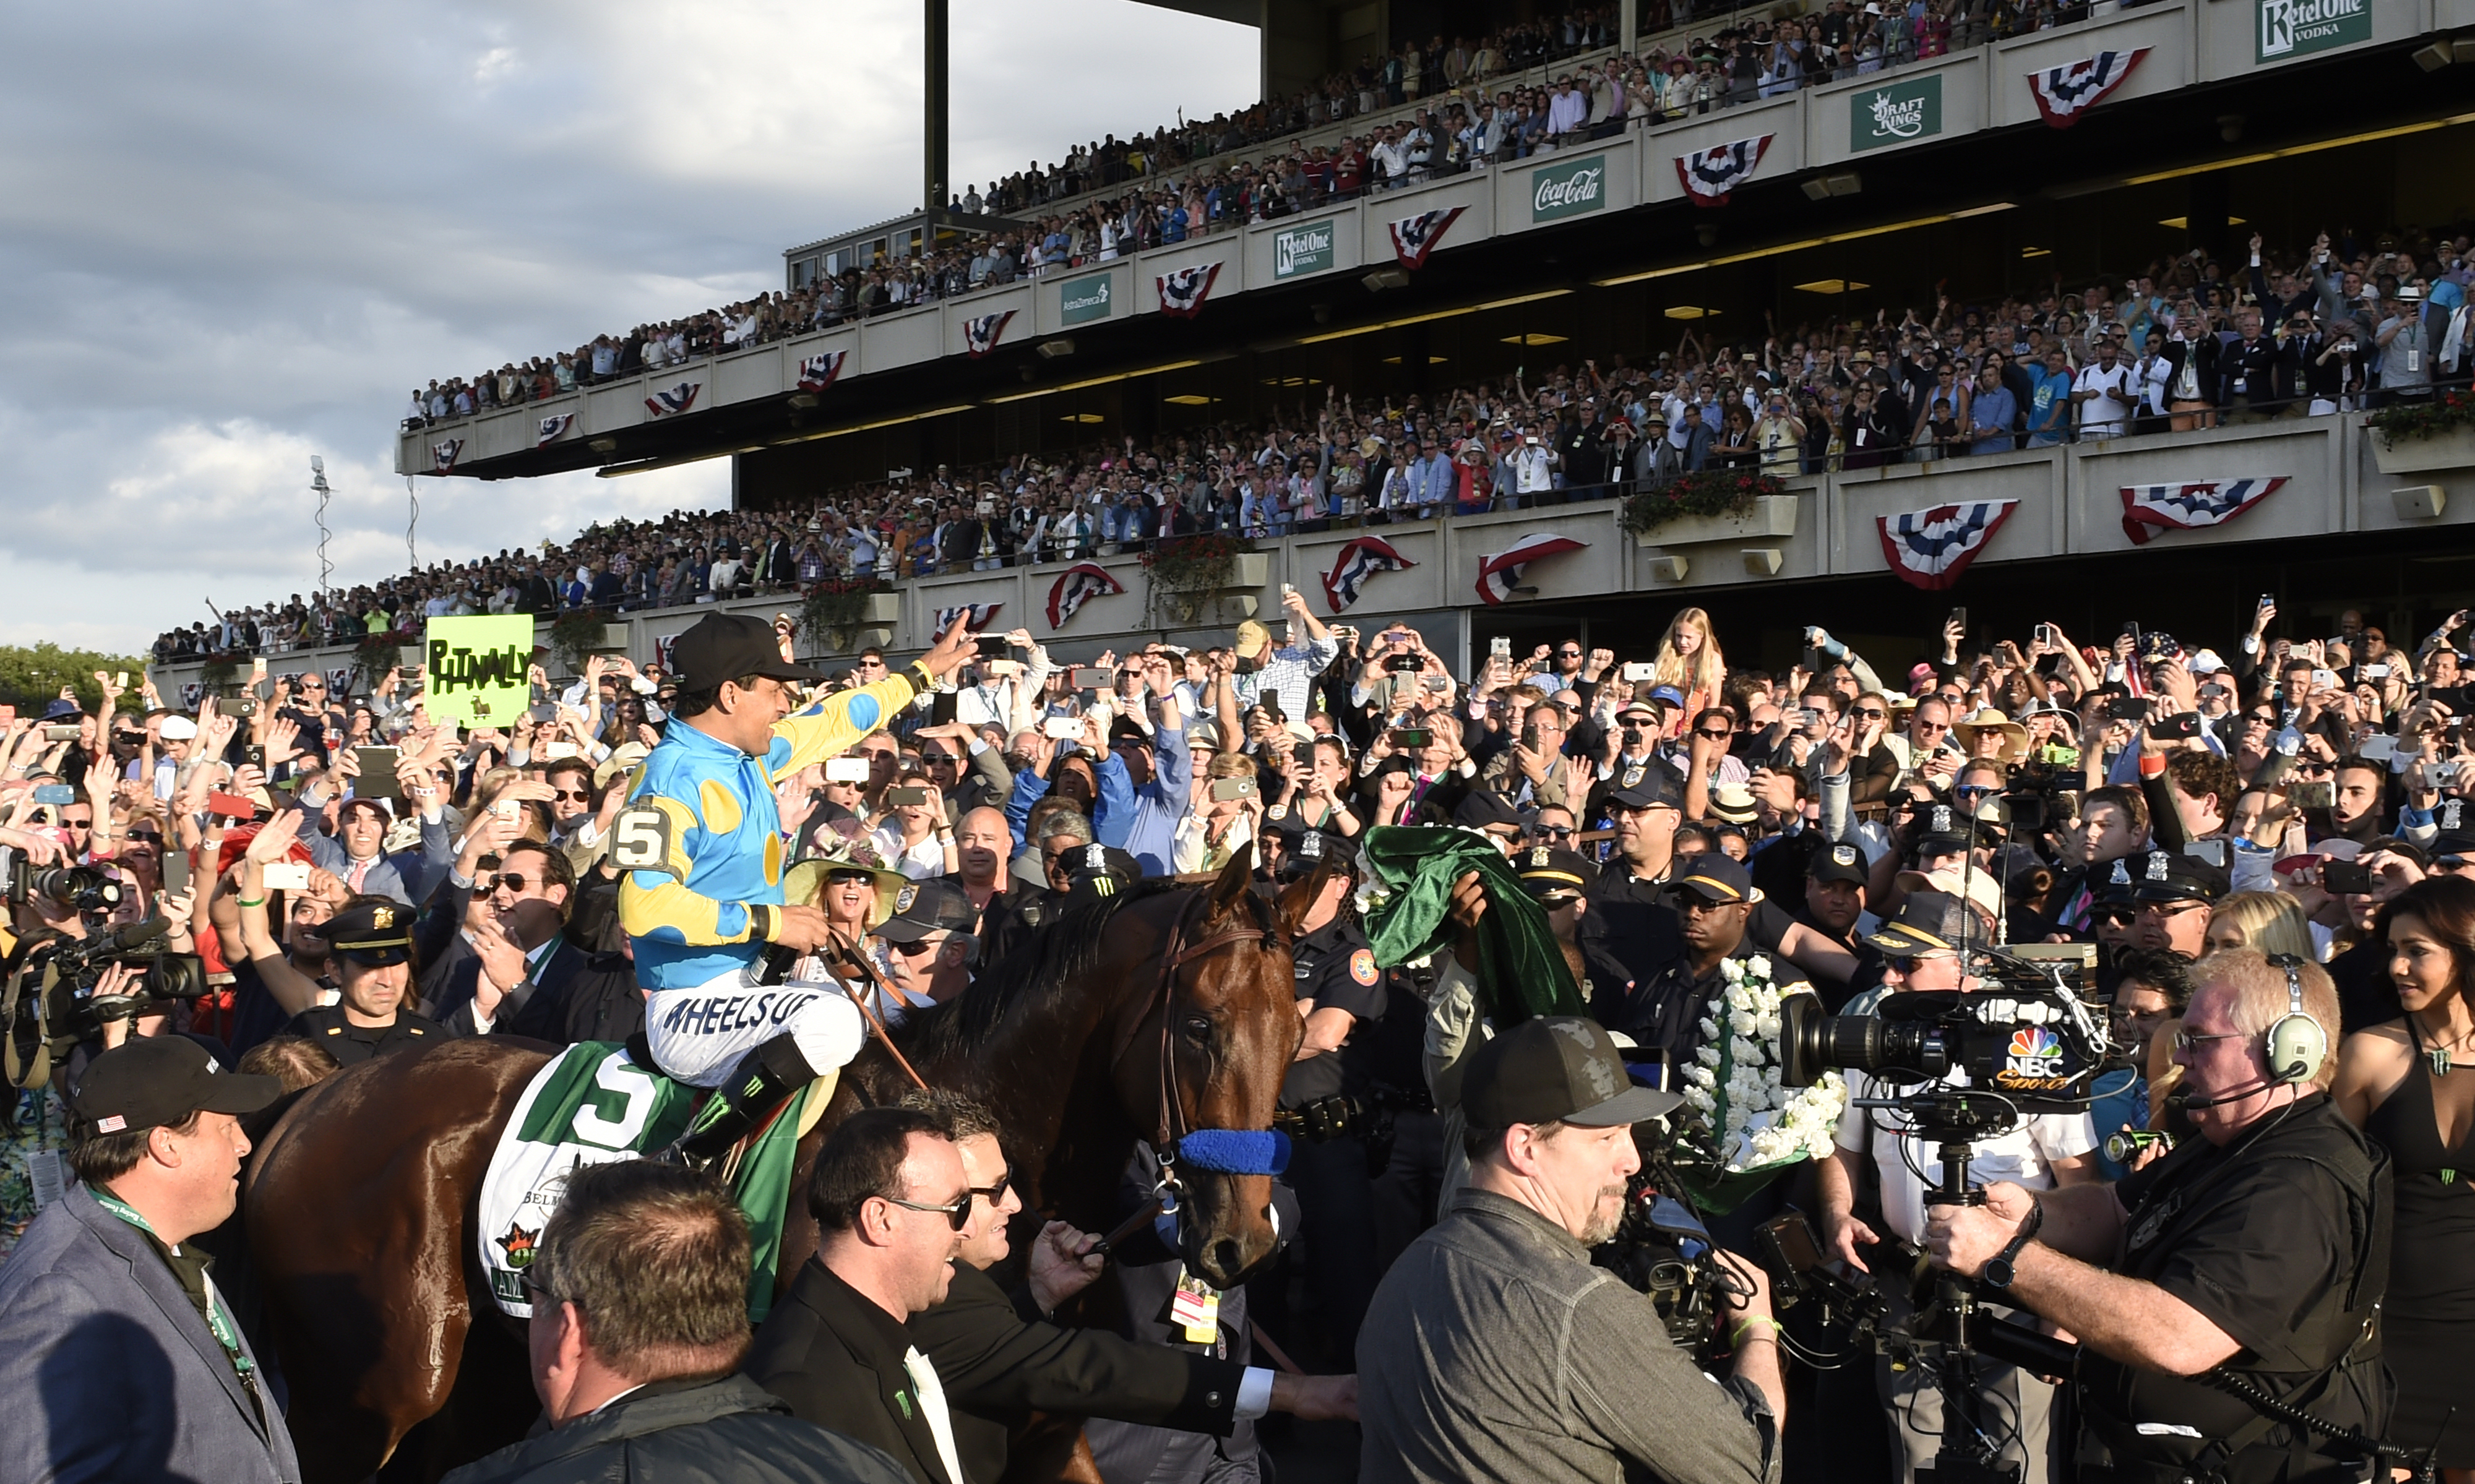 American Pharoah, Victor Espinoza up, after winning the 2015 Belmont Stakes to become America's 12th Triple Crown winner (Skip Dickstein)